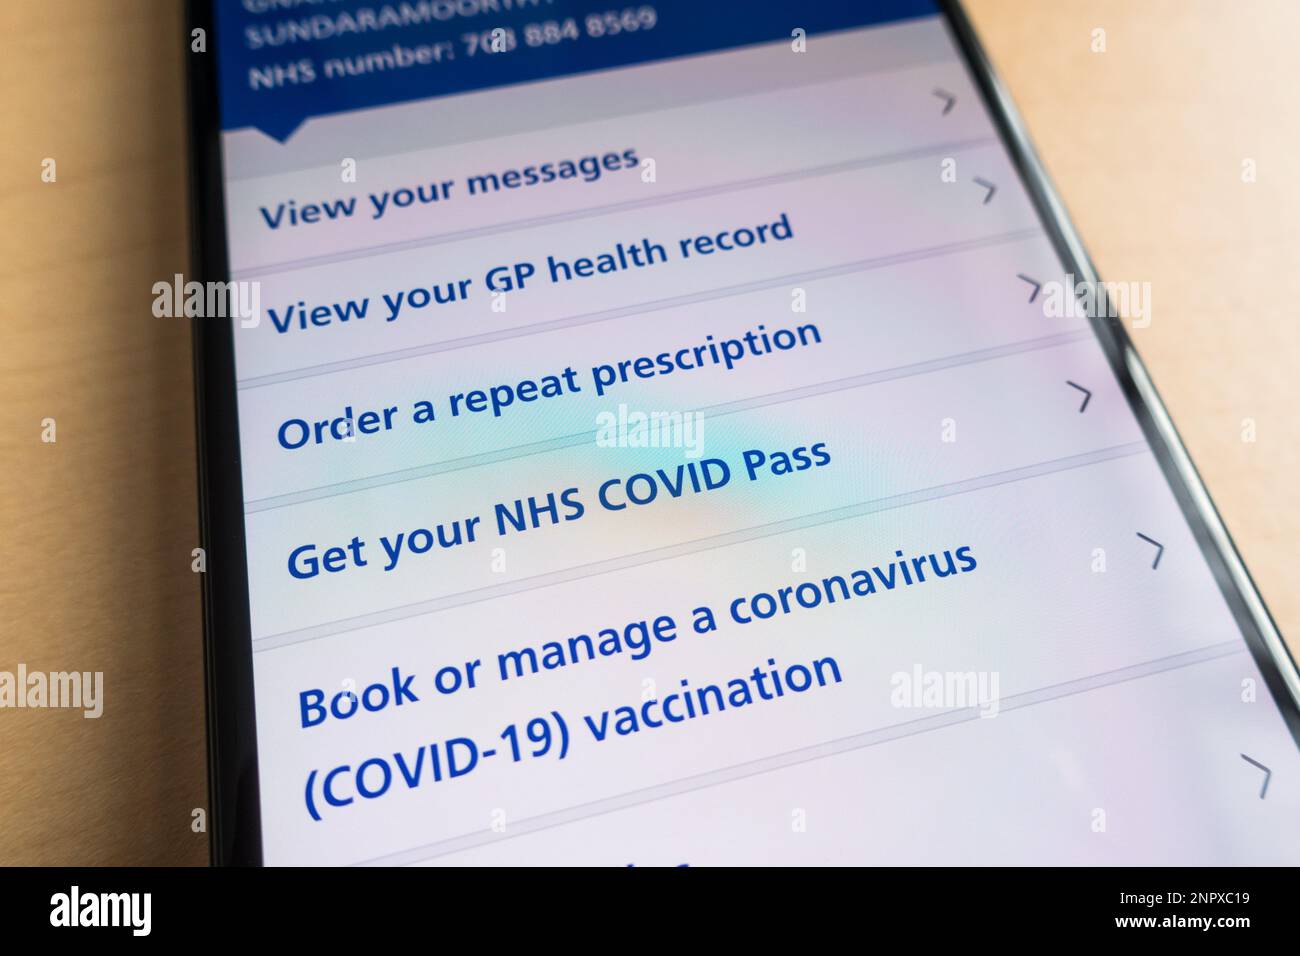 NHS health services on app Stock Photo